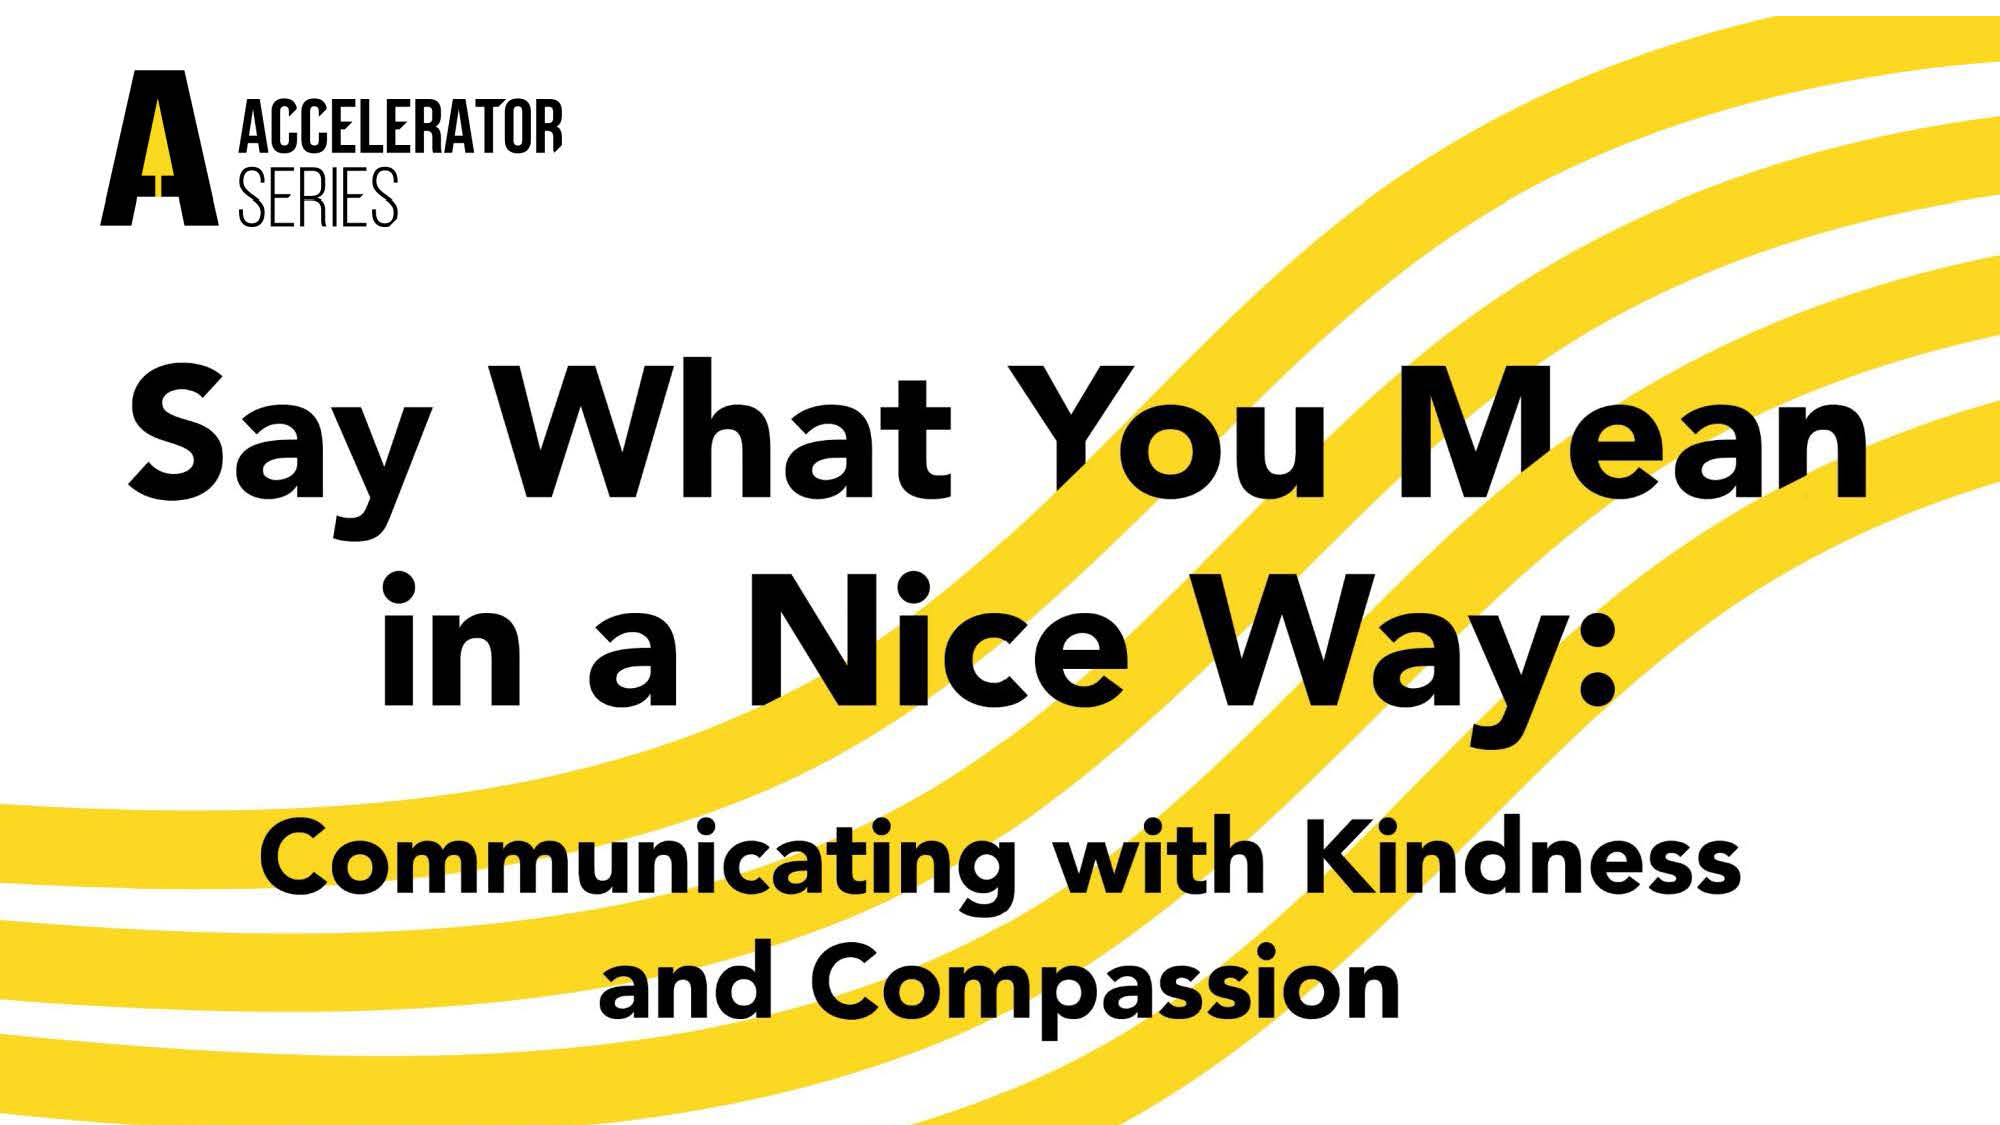 ADA Accelerator Series —Say What You Mean in a Nice Way: Communicating with Kindness and Compassion (Recorded Webinar)